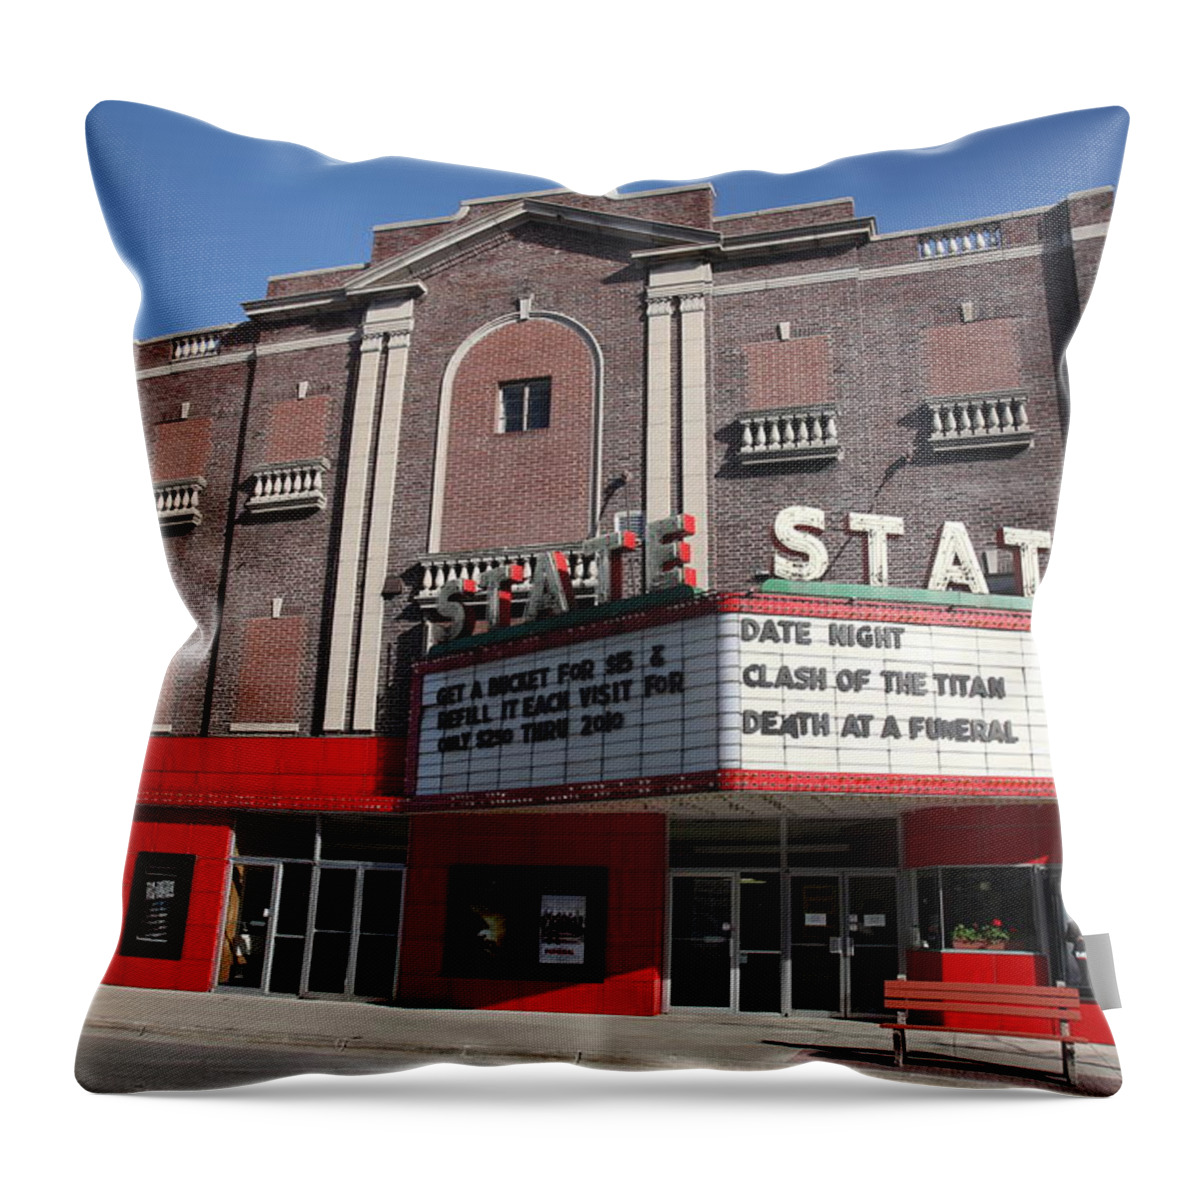 Alpena Throw Pillow featuring the photograph Alpena Michigan - State Theater by Frank Romeo